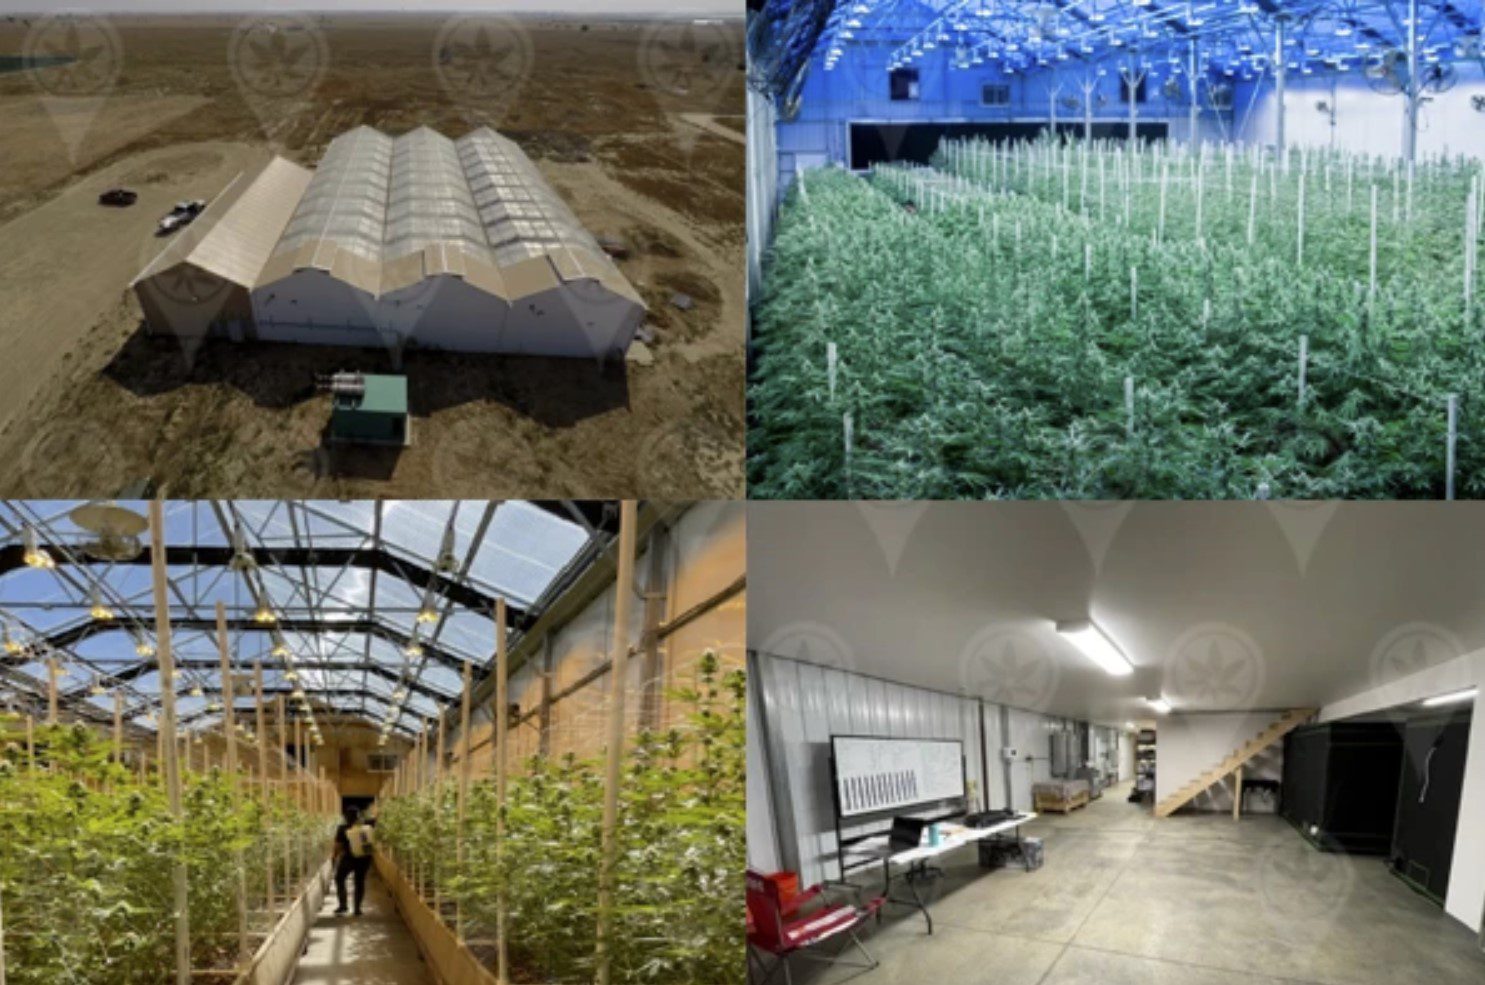 Off Market – Colorado 13,000 Sqft Cultivation Business Opportunity